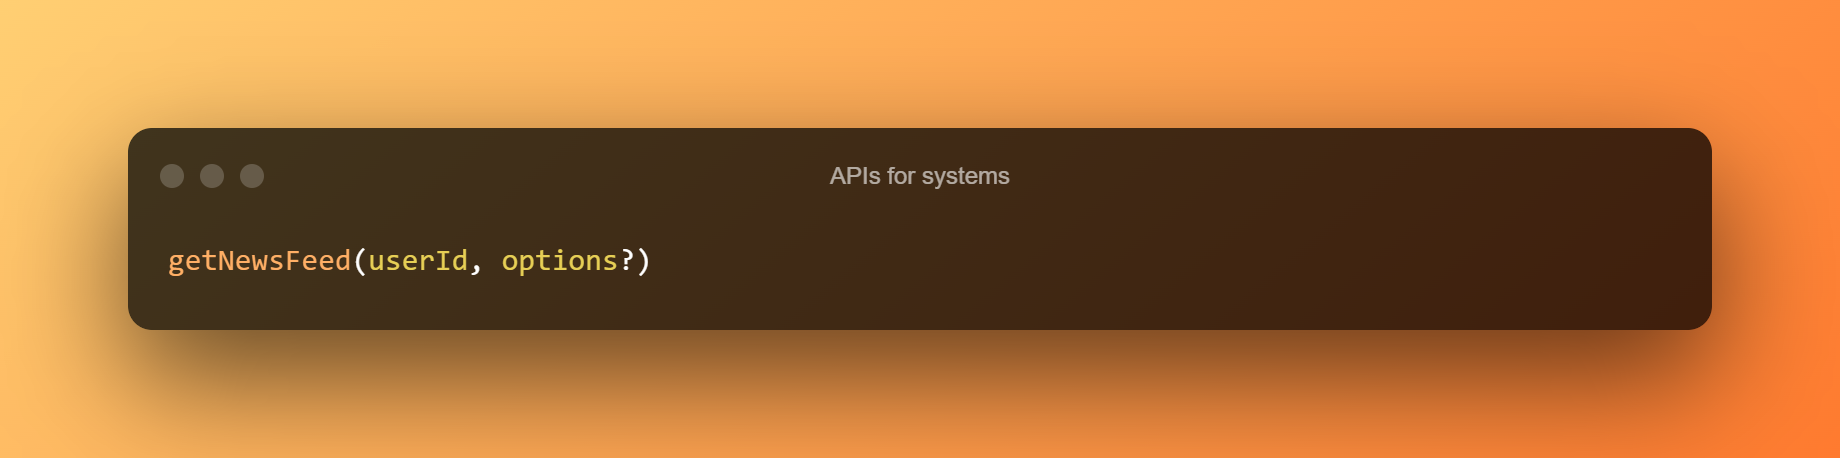 APIs For Systems